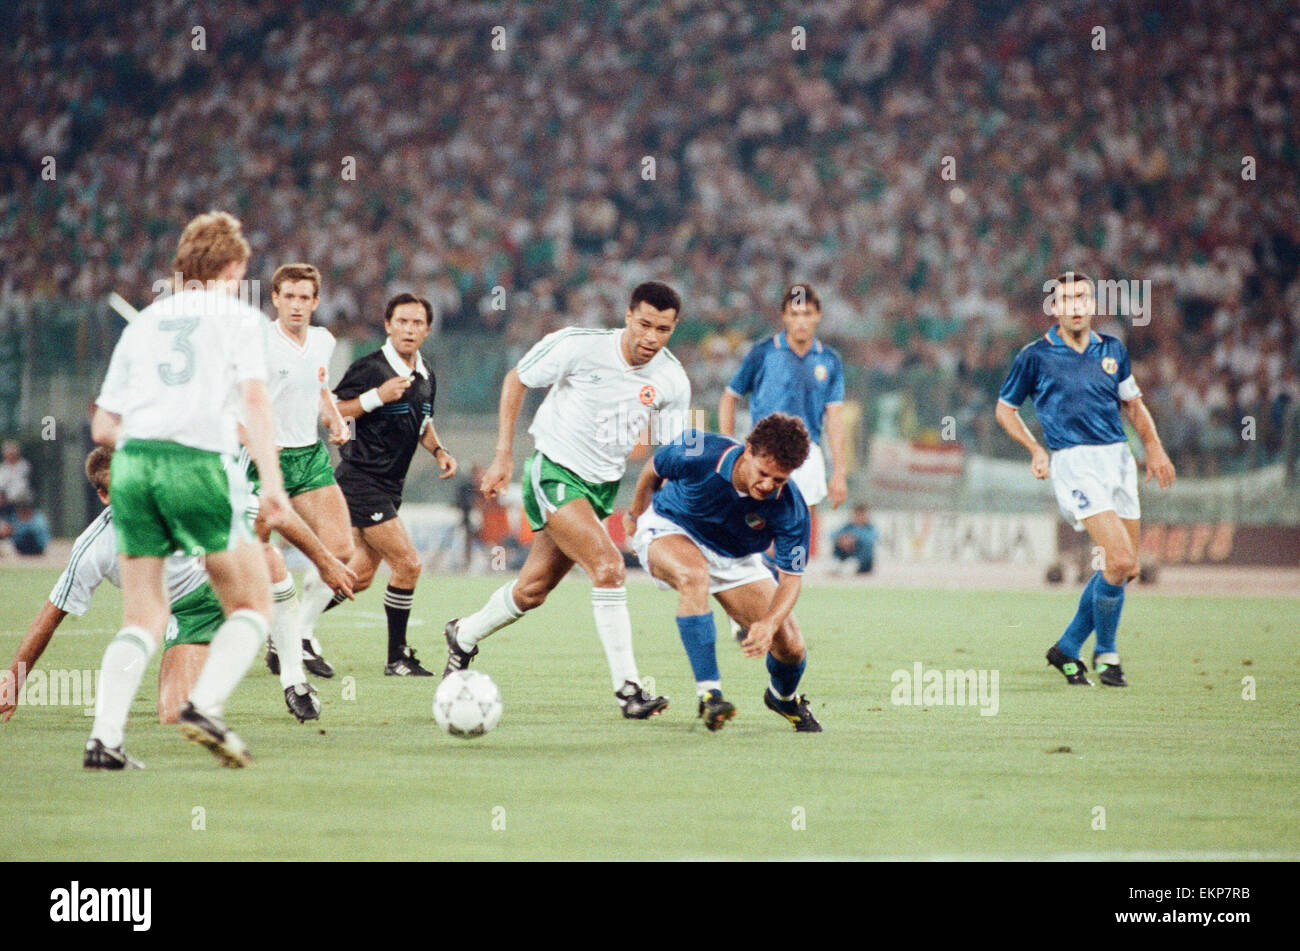 1990 World Cup Quarter Final match in Rome, Italy. Italy 1 v Republic of Ireland 0. Italy's Roberto Baggio watched by Paul McGrath. 30th June 1990. *** Local Caption *** Giuseppe Bergomi Steve Staunton Kevin Sheedy Stock Photo